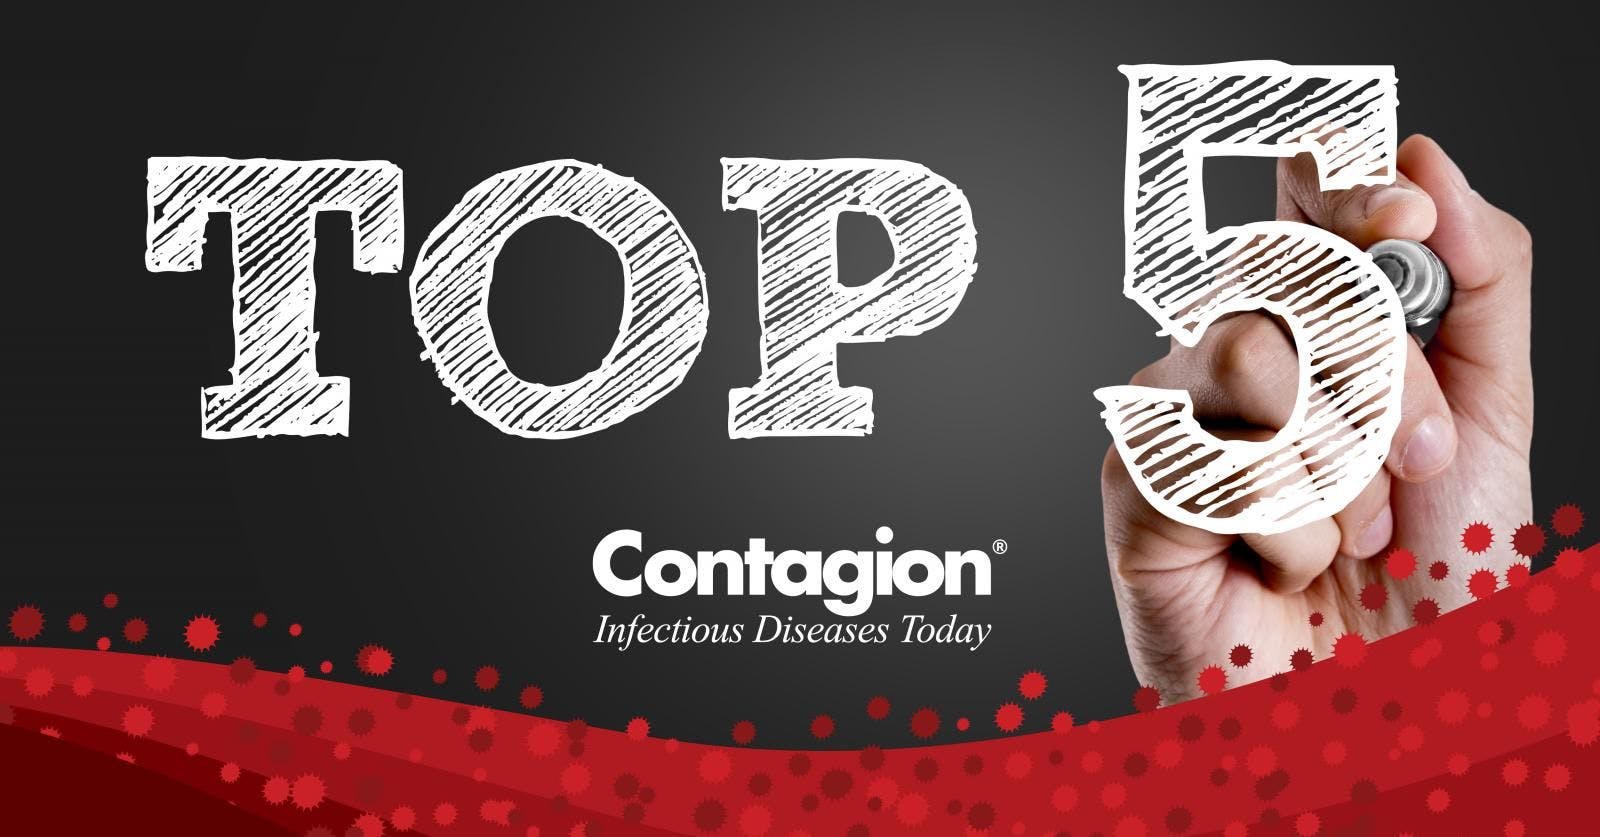 Top Infectious Disease News of the Week&mdash;February 16, 2020